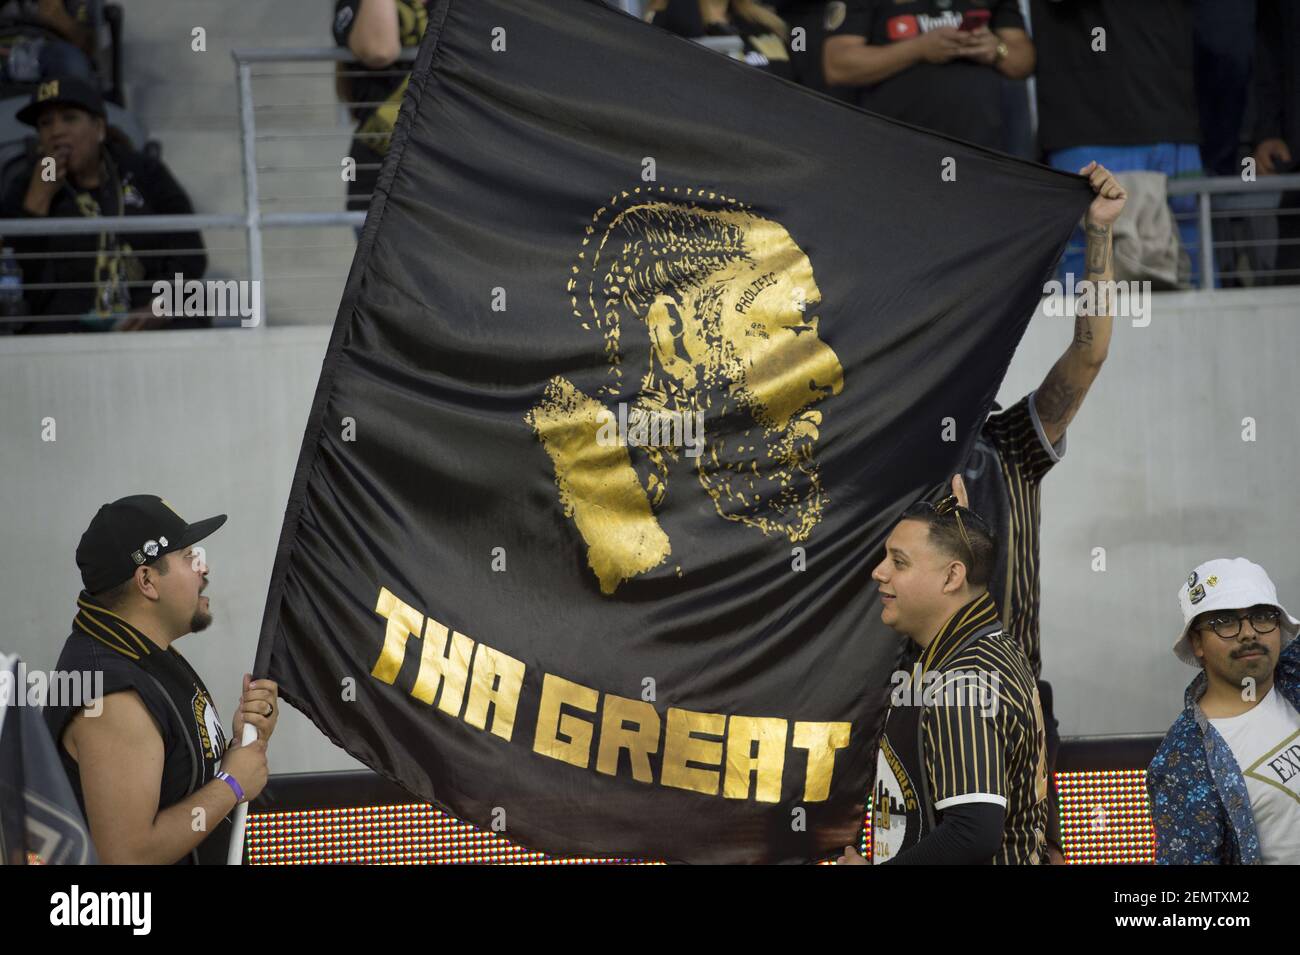 Apr 13, 2019; Los Angeles, CA, USA; Fans hold sides for Nipsey Hussle prior to the game between the Los Angeles FC and FC Cinncinati at Banc of California Stadium. Mandatory Credit: Kelvin Kuo-USA TODAY Sports/Sipa USA Stock Photo